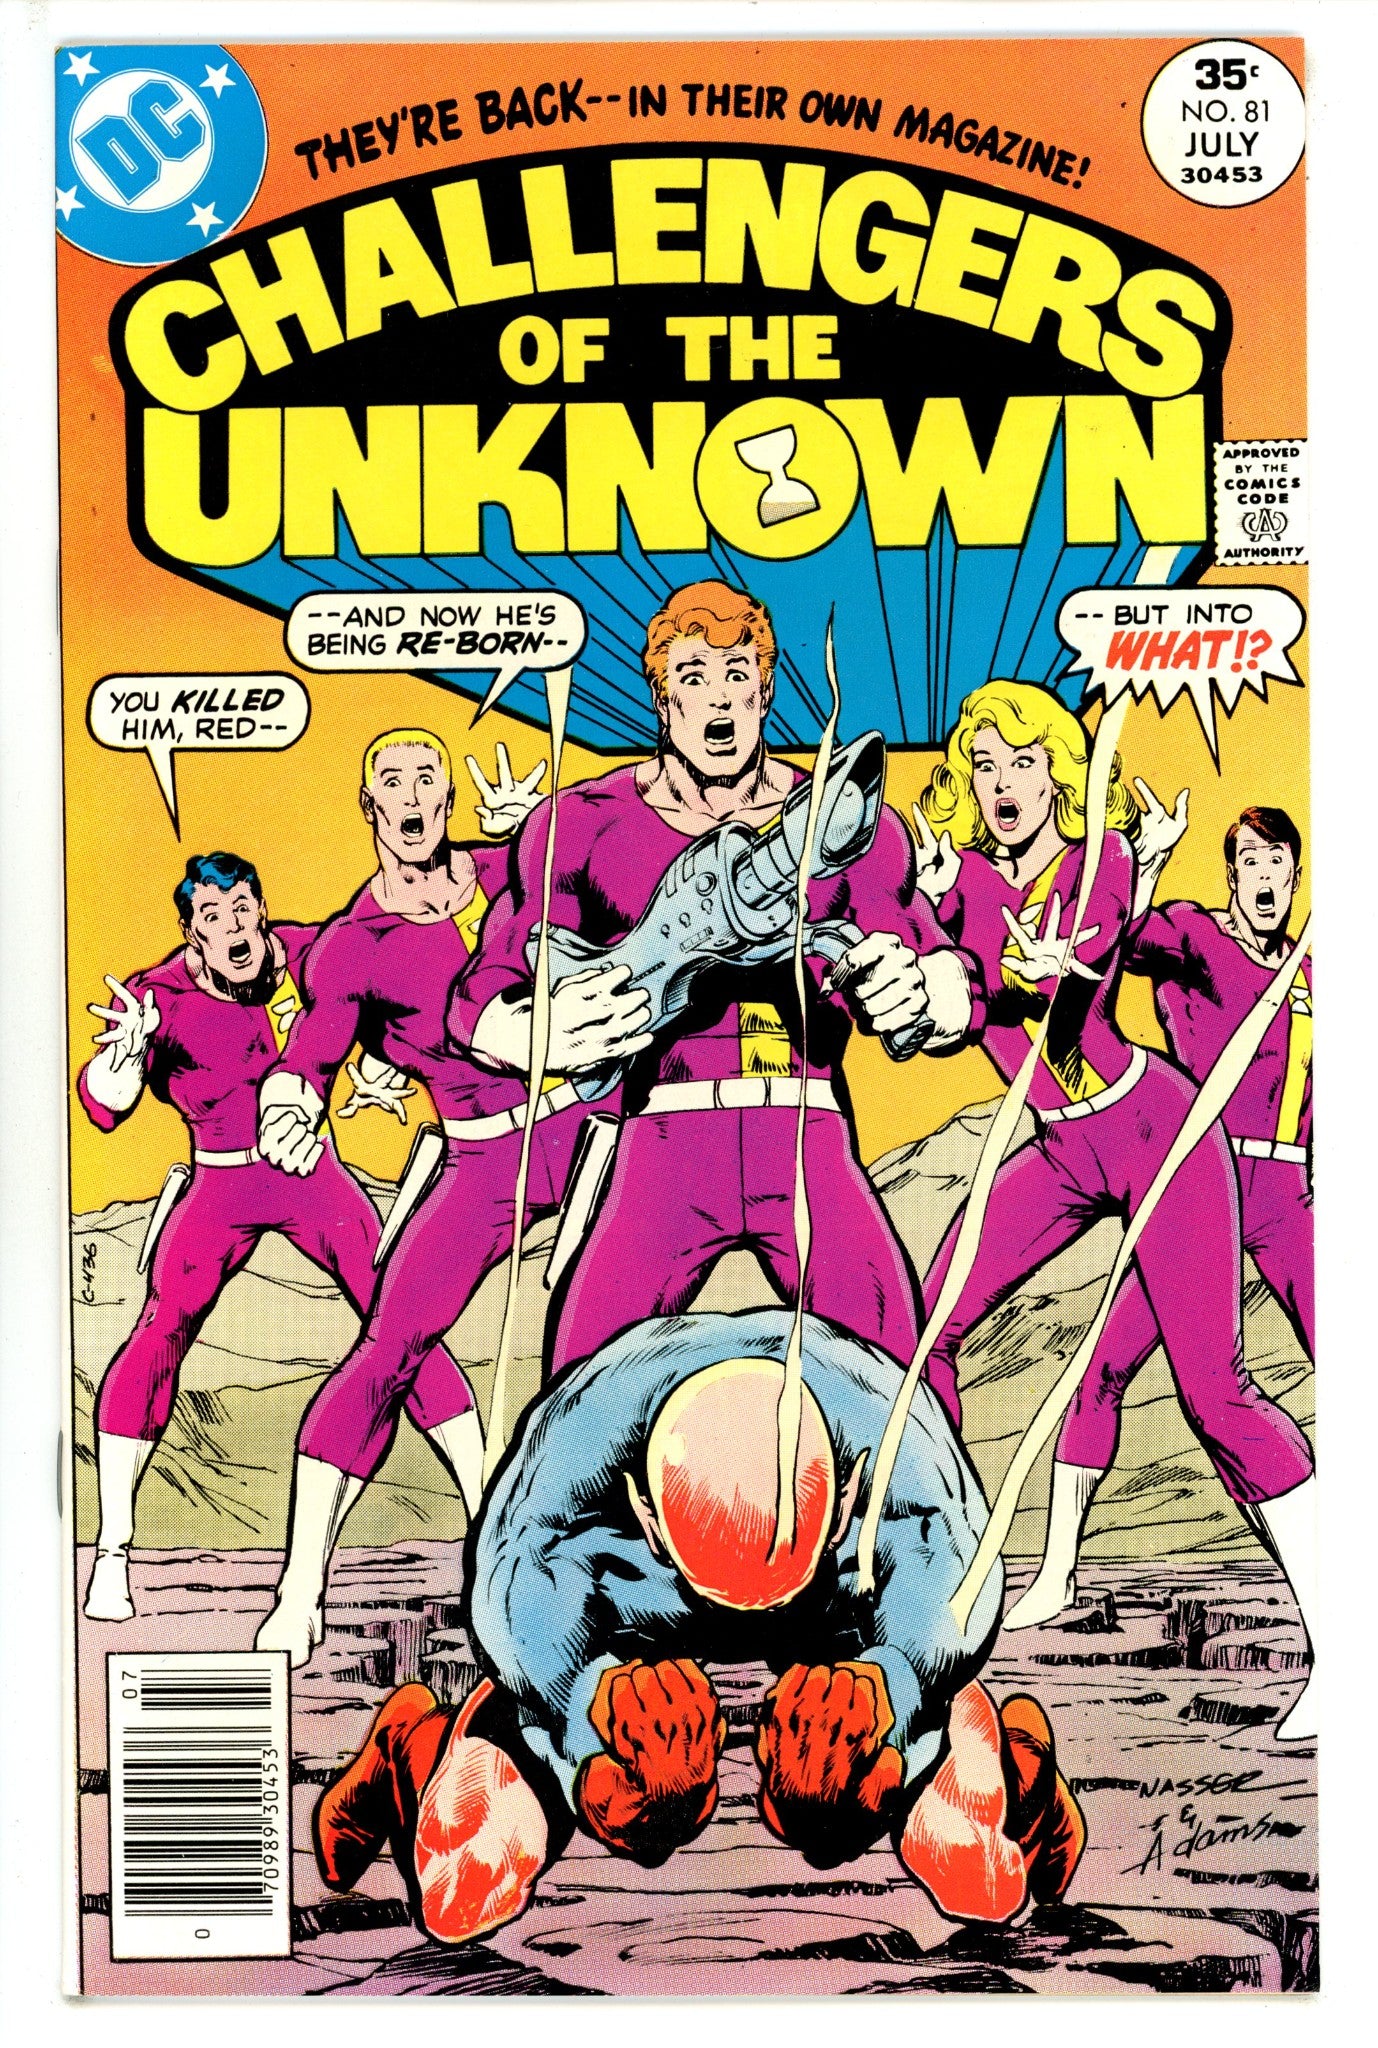 Challengers of the Unknown Vol 1 81 NM- (1977)